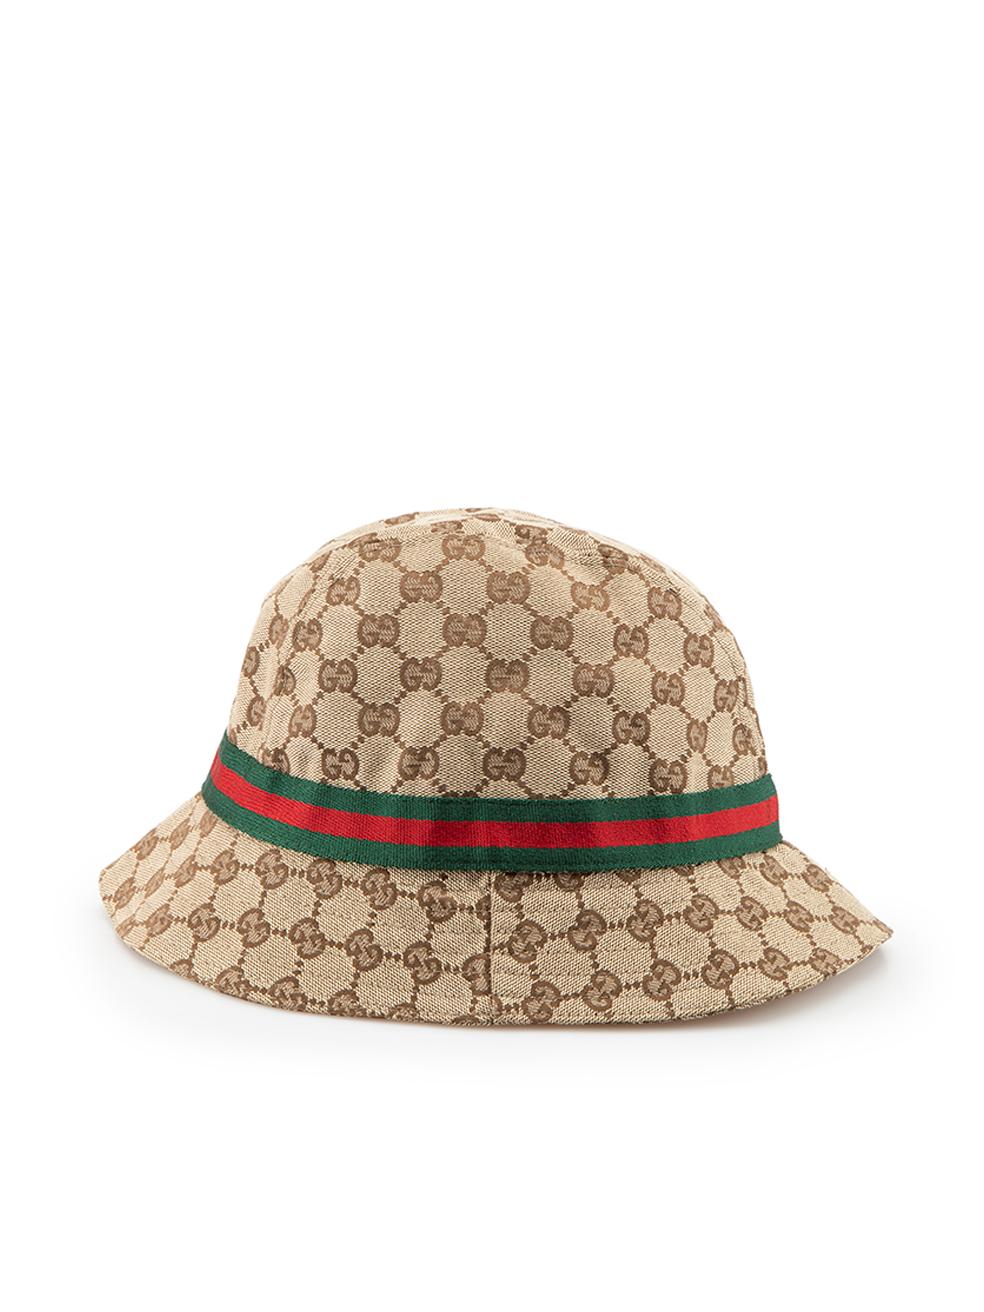 CONDITION is Good. Minor wear to hat is evident. Light wear to internal binding where light discolouration can be seen as a result of wear, a section of the lining stitching has also become partially unravelled on this used Gucci designer resale